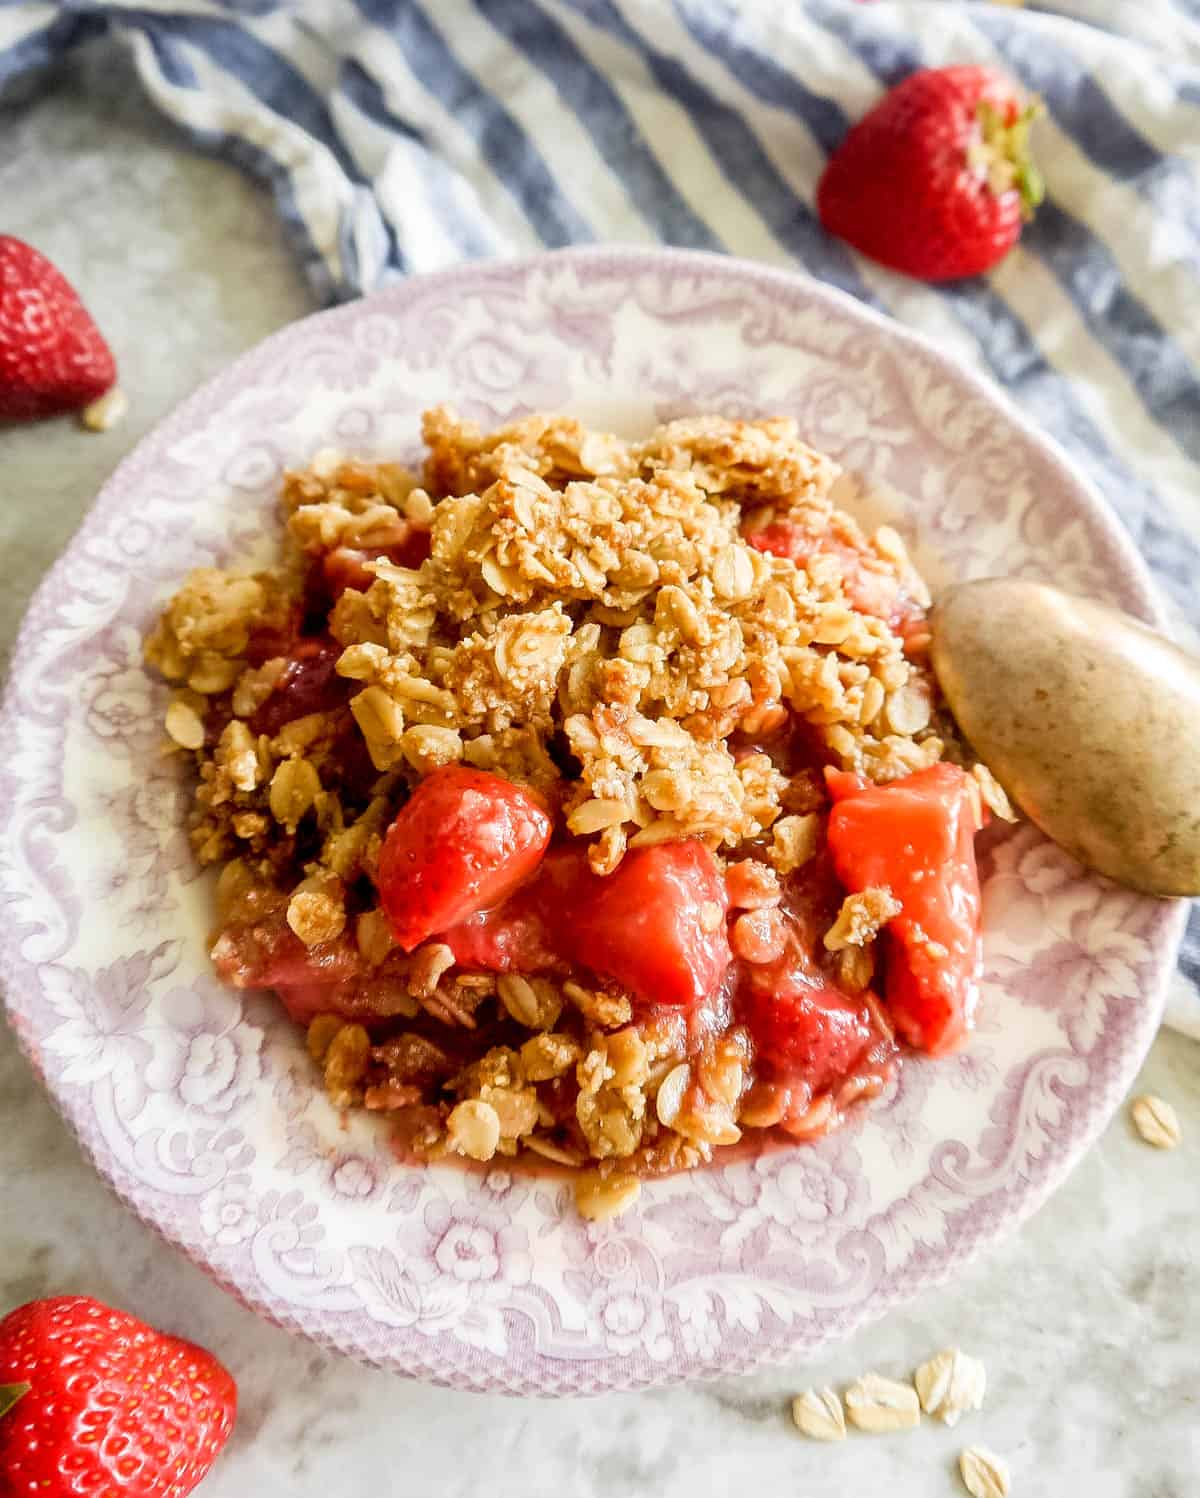 A plate full of strawberry crisp, with a spoon on the plate.